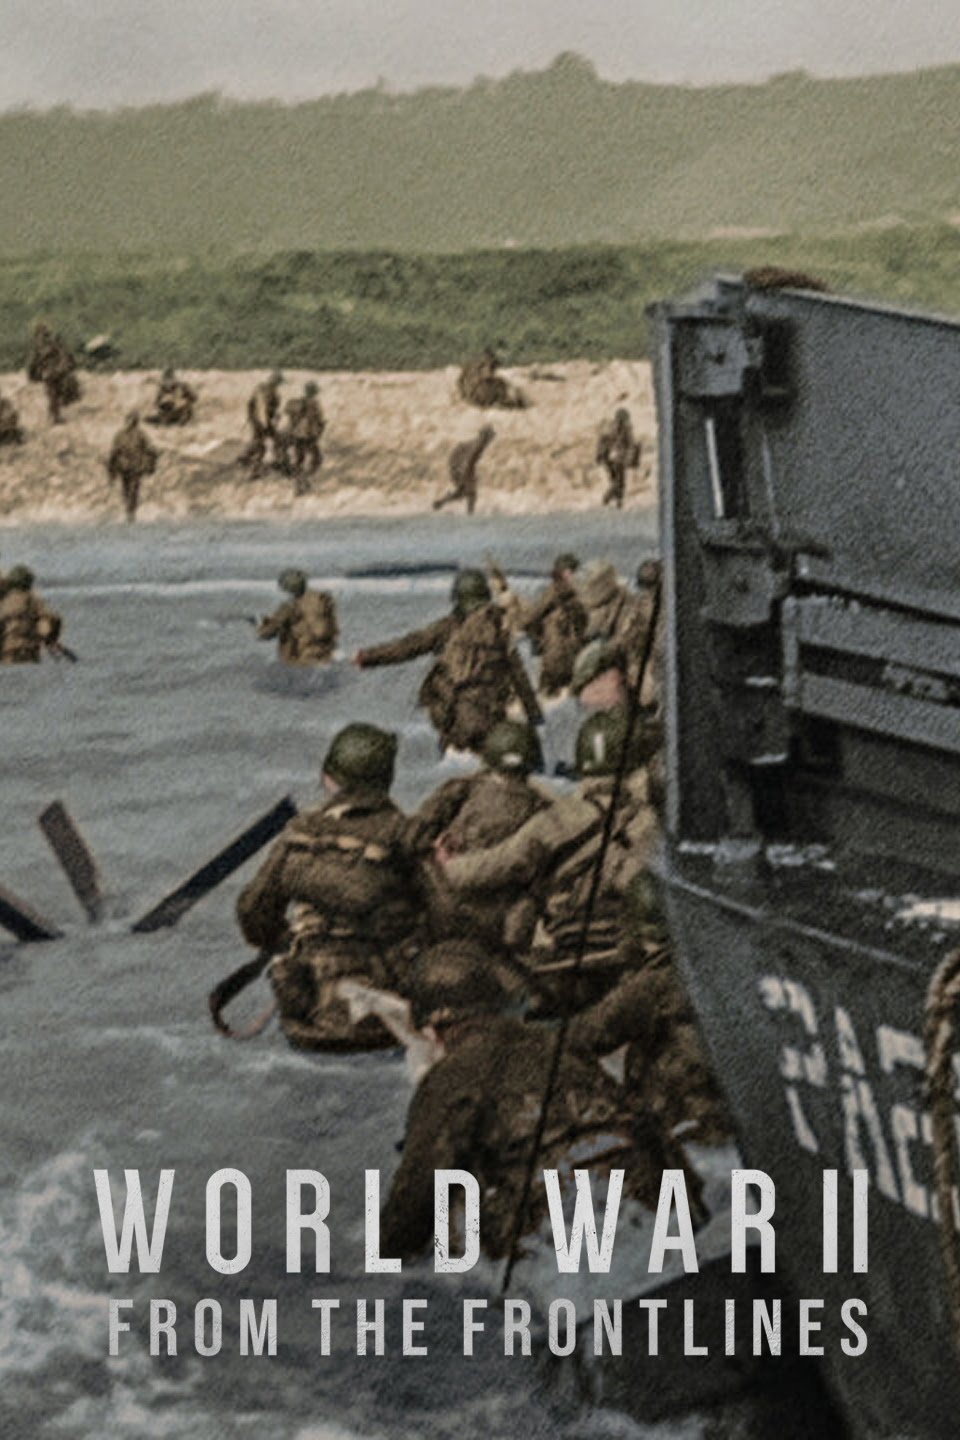 World War II From the Frontlines S01 | En 6CH | [1080p] (H264) Bcc6b6aa6b5d70a55c51f5b9986b72ad